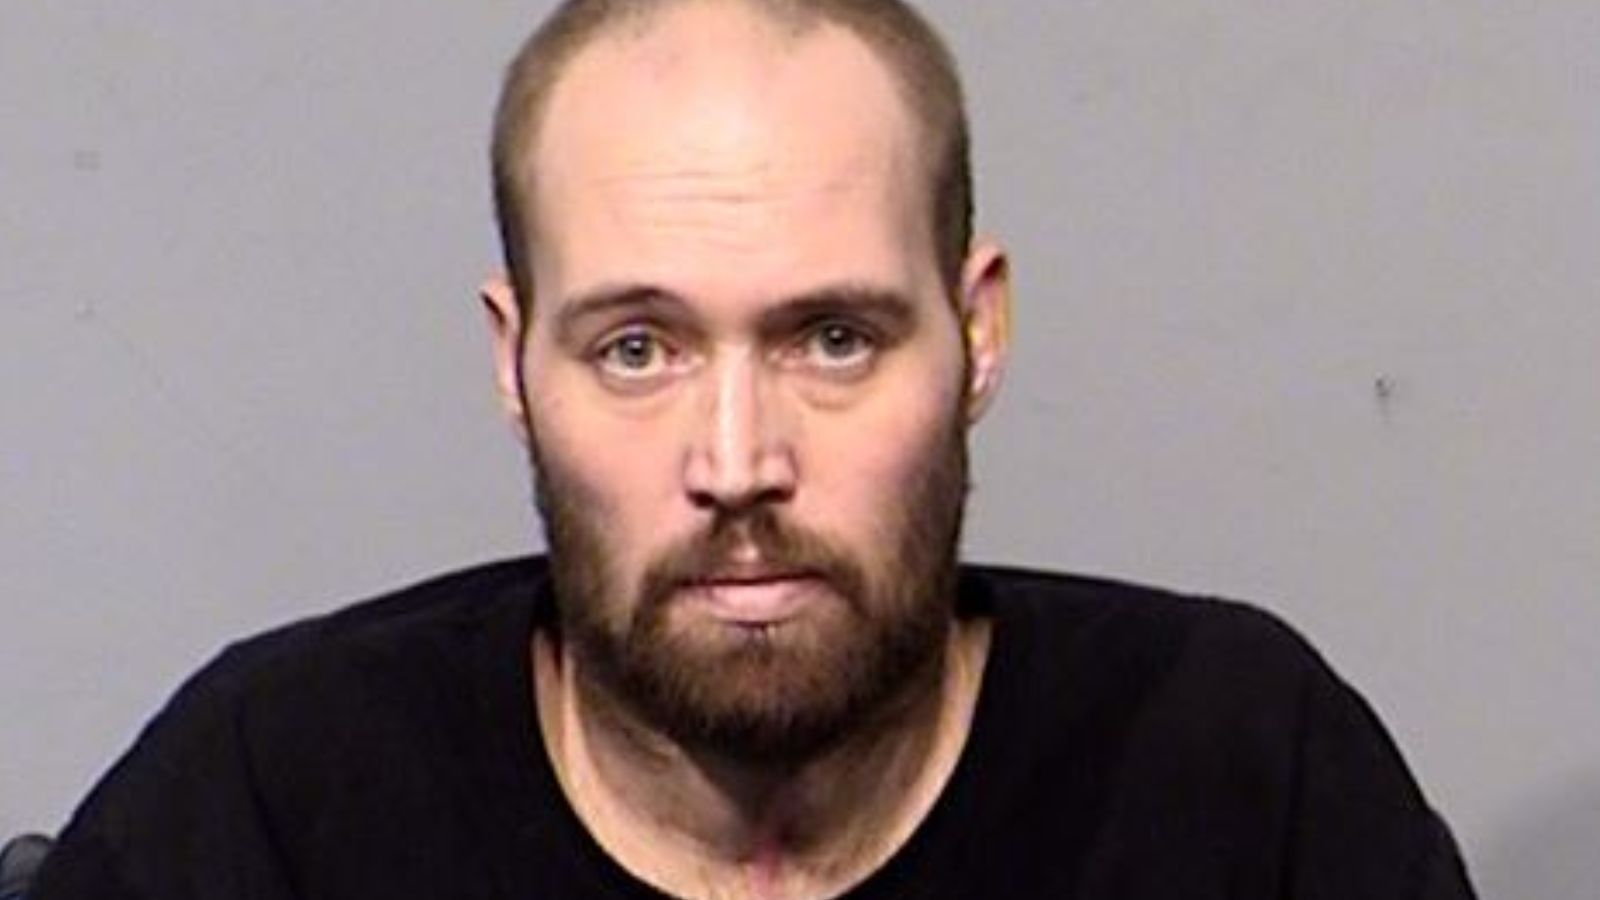 Man from Prescott Valley faces 20 years in prison after shooting...